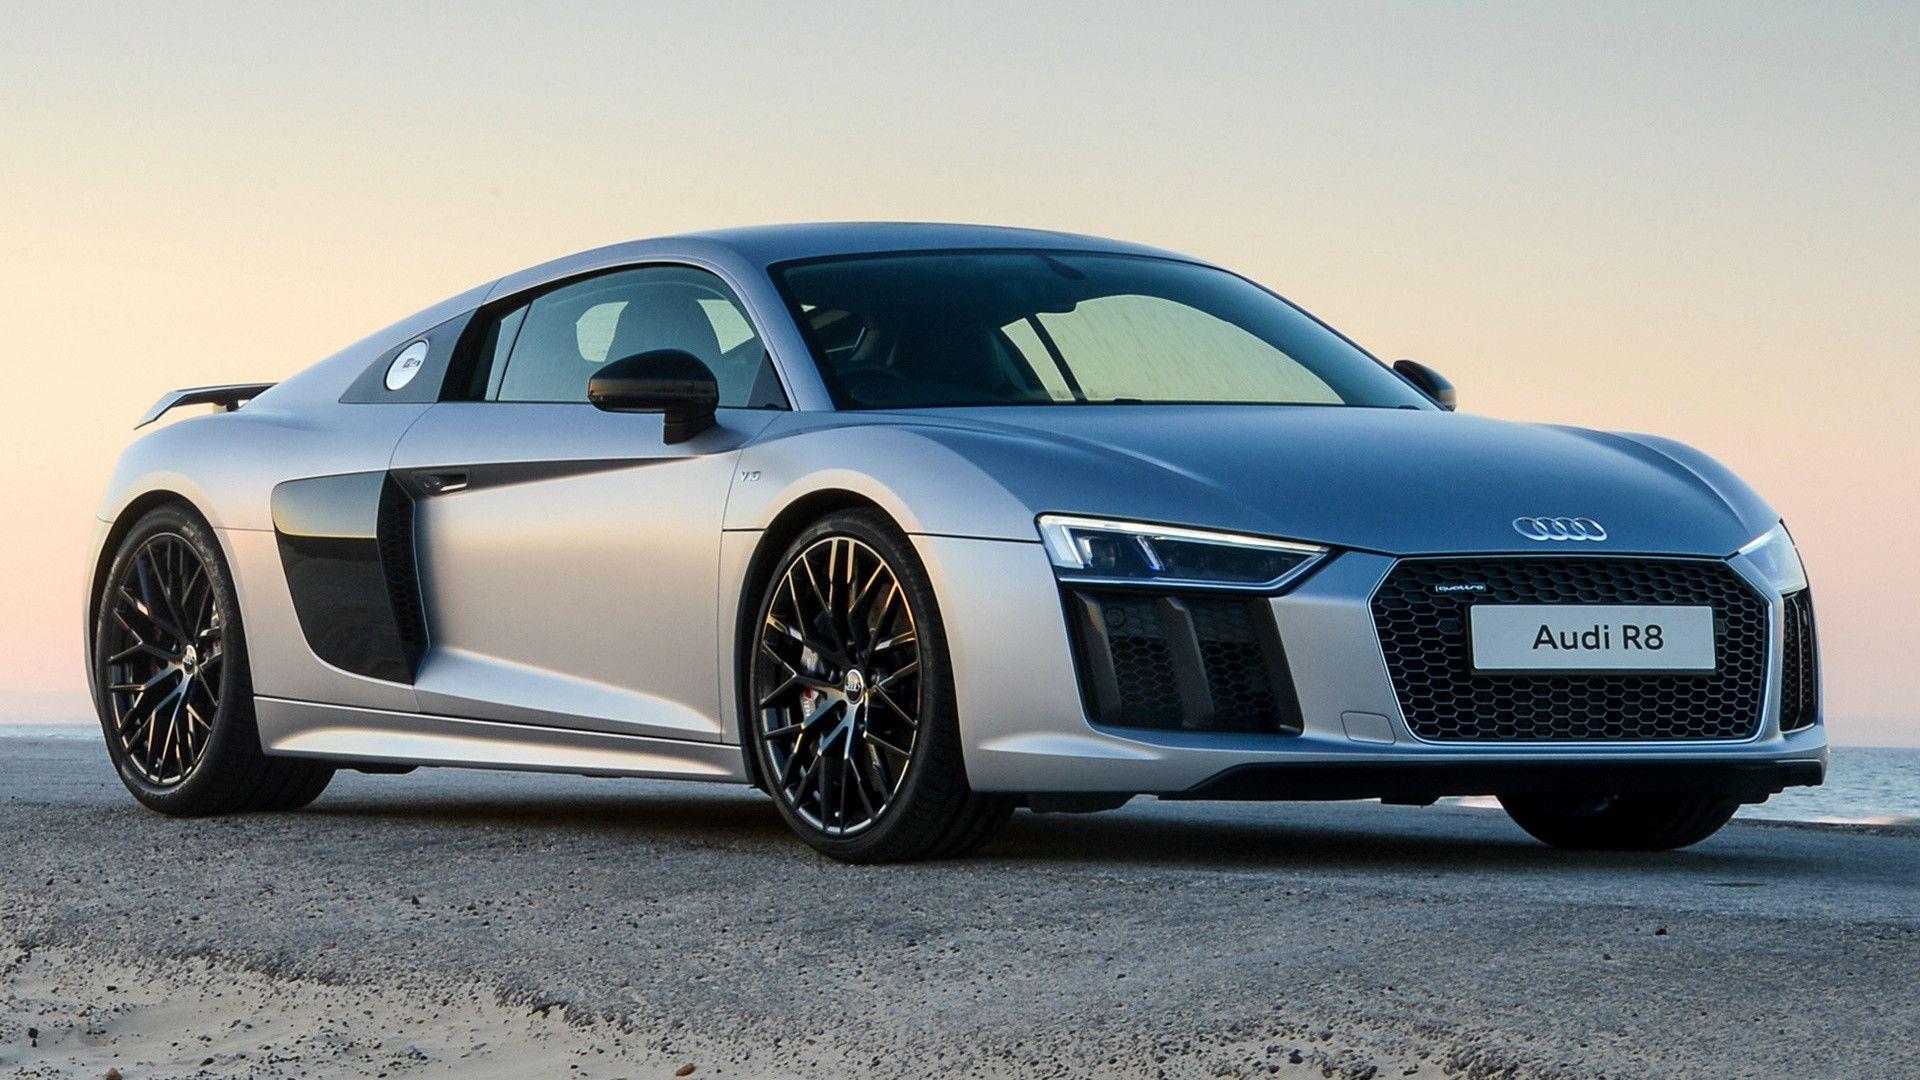 41+ Blacked Out2017 Audi R8 V10 Plus Wallpaper free download